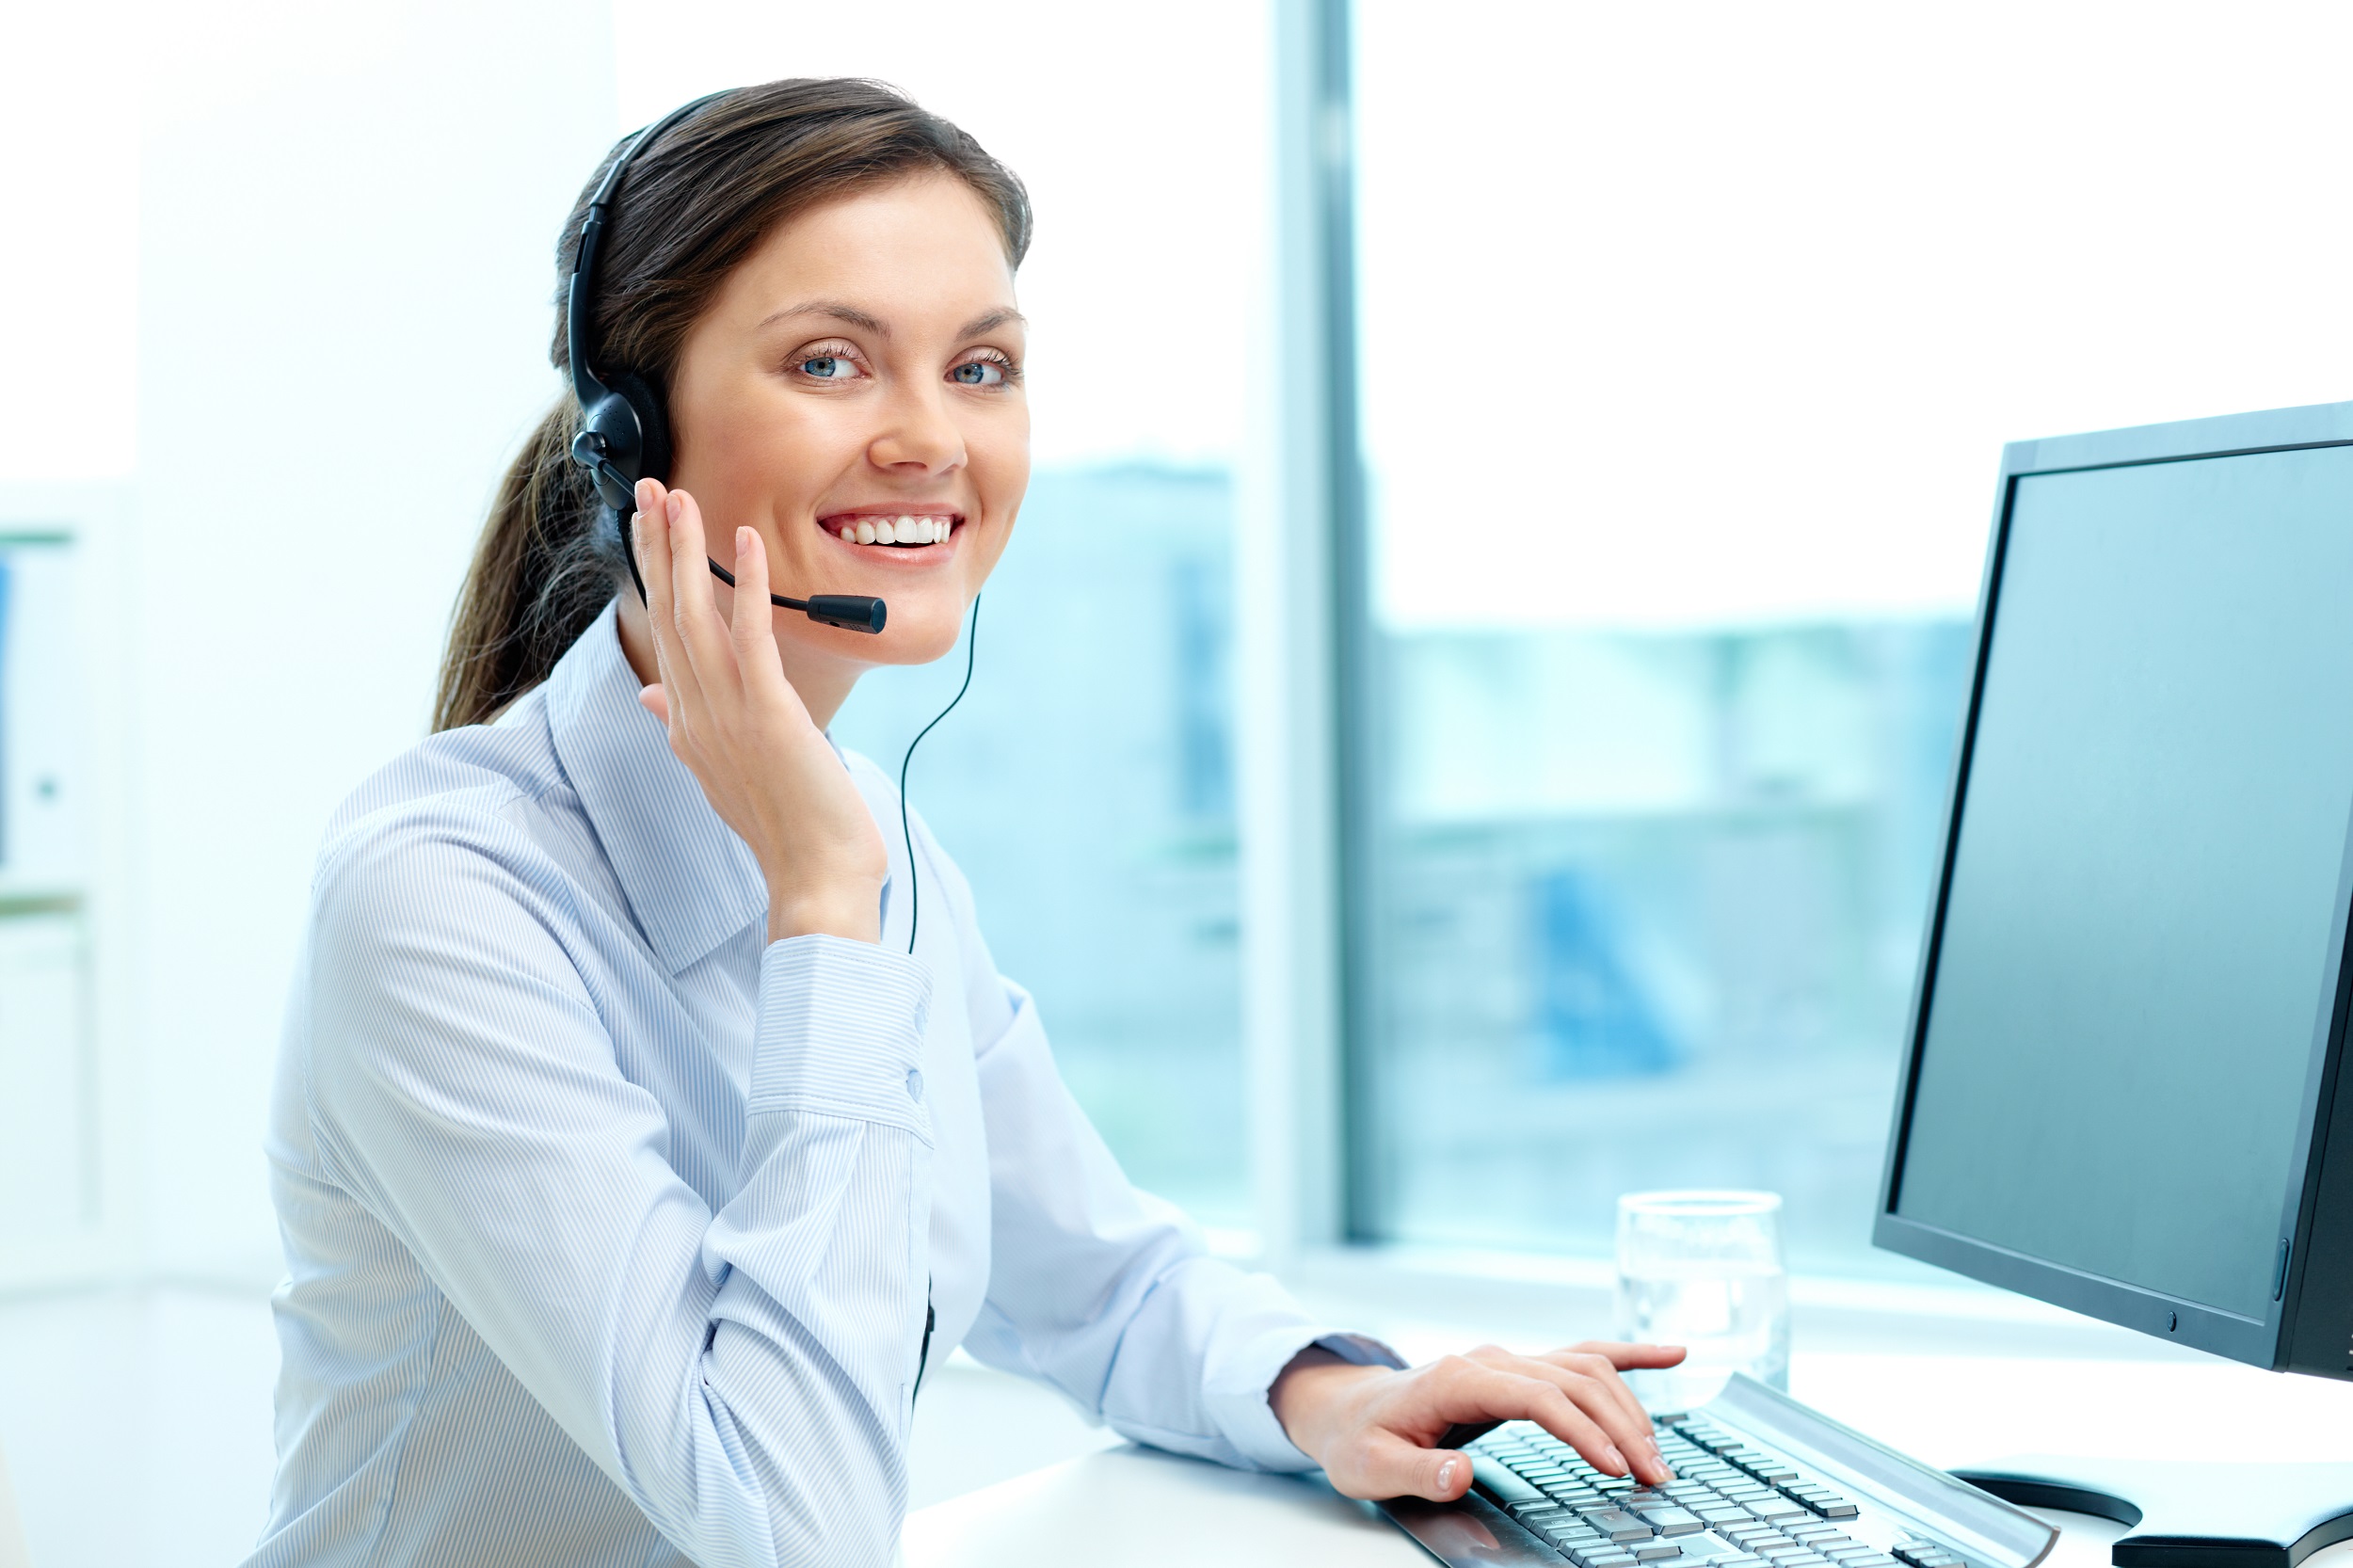 Customer service representative wearing a headset and sitting in front of a PC